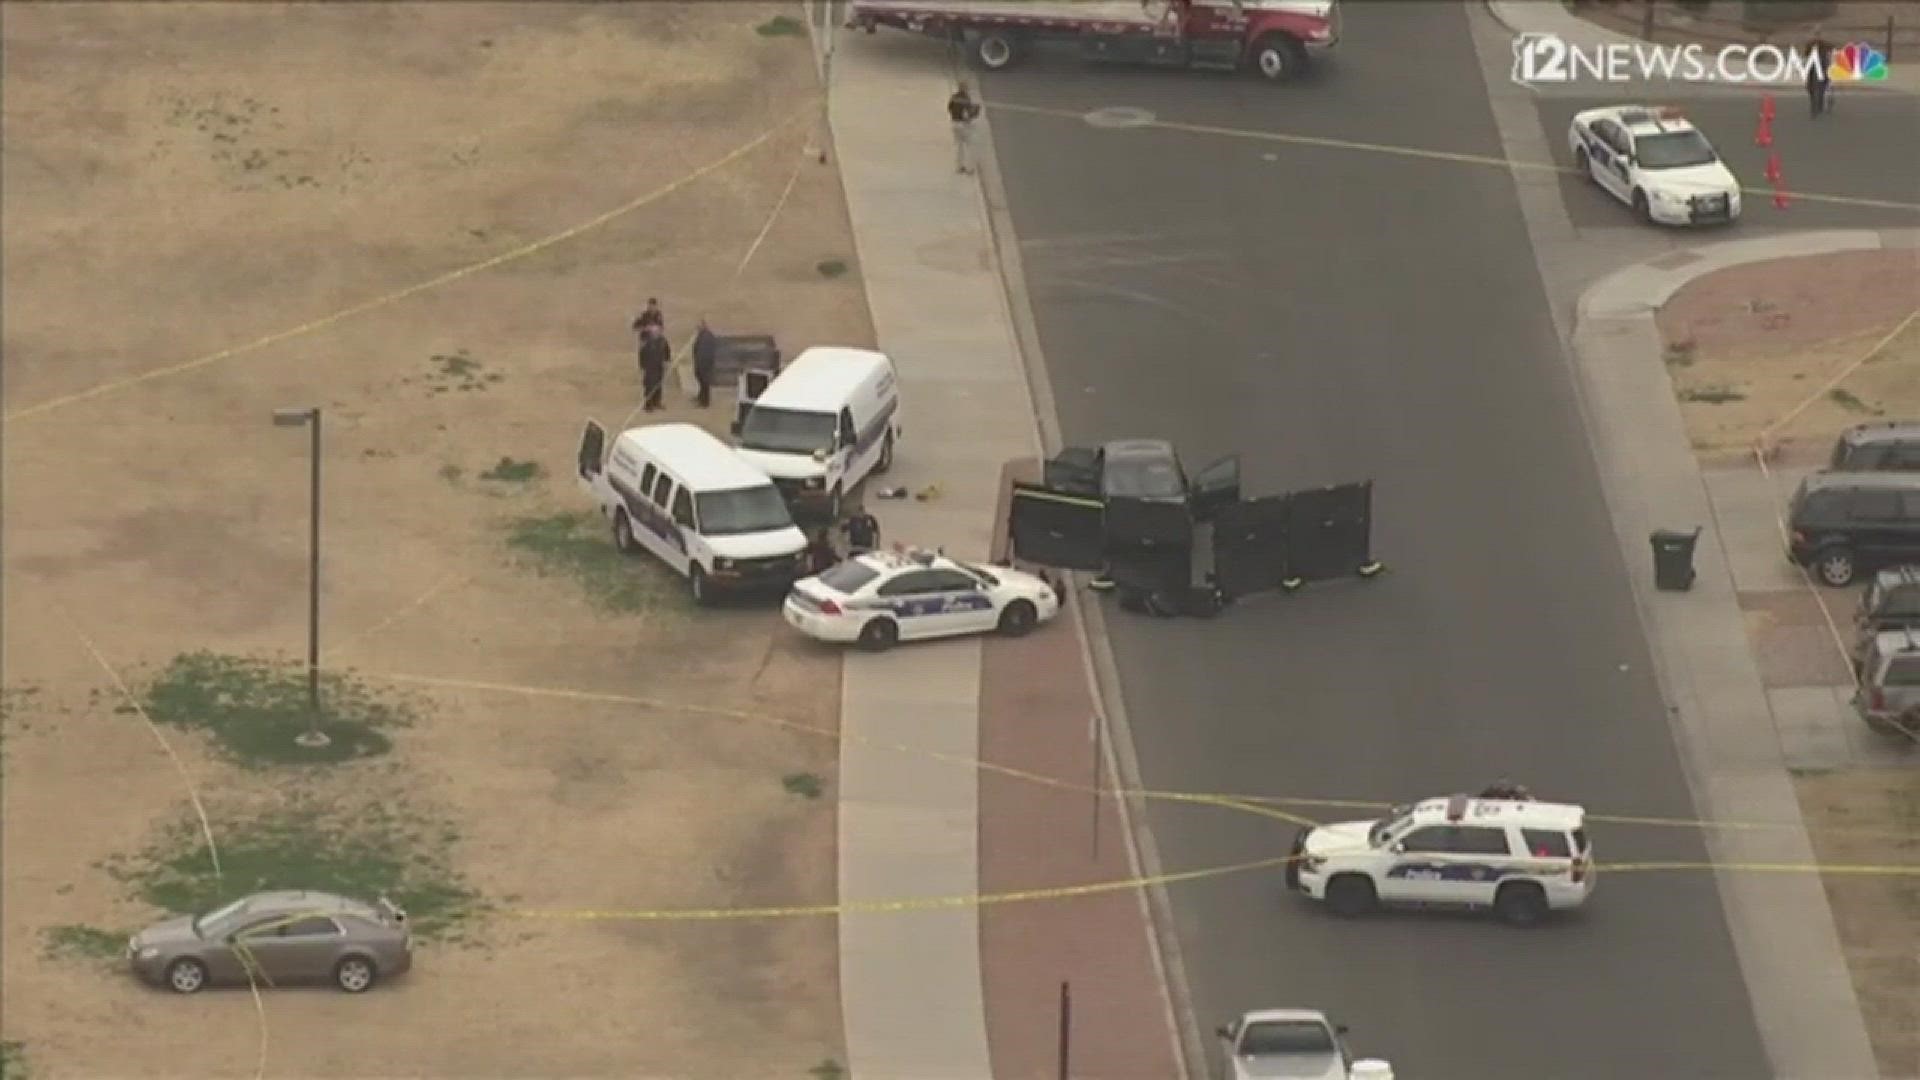 Two men were found dead inside a parked vehicle near 83rd Ave. and Thomas Road, according to Phoenix police.